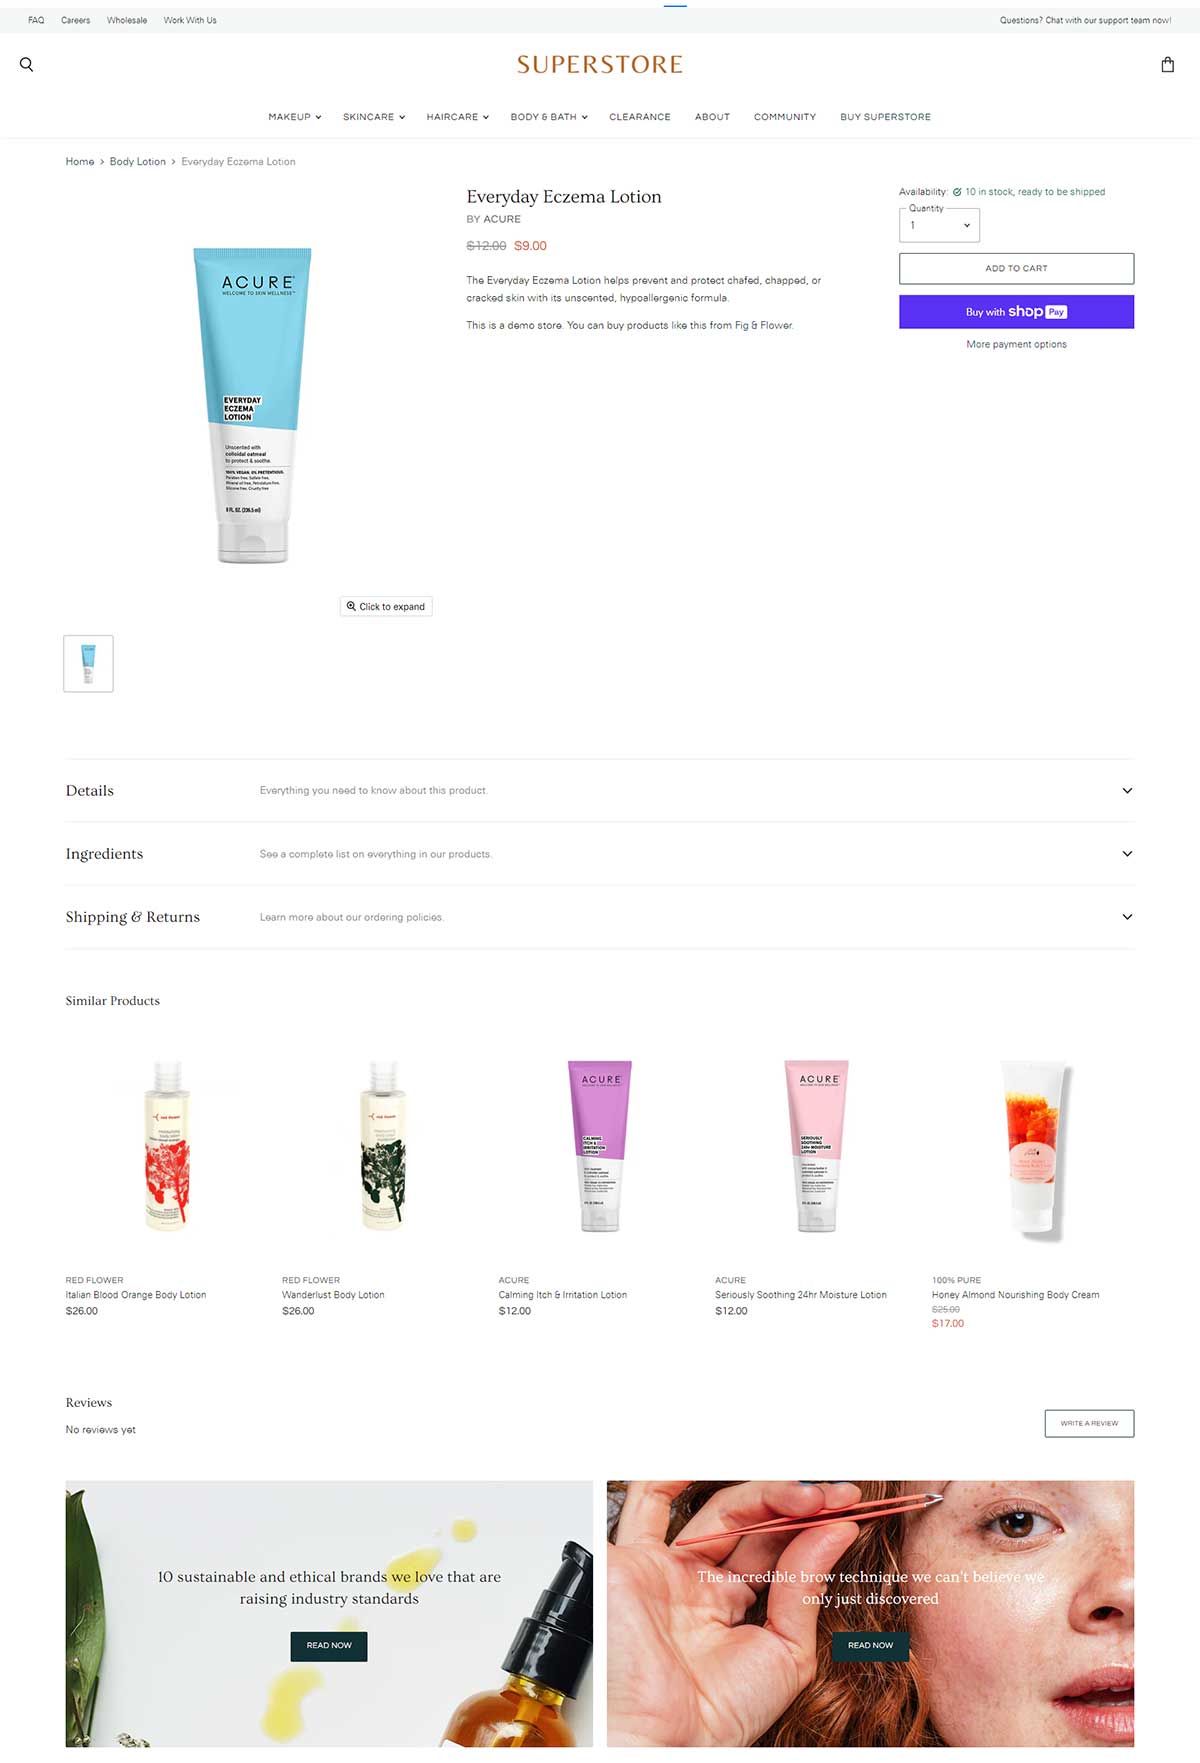 Superstore theme - Product Page